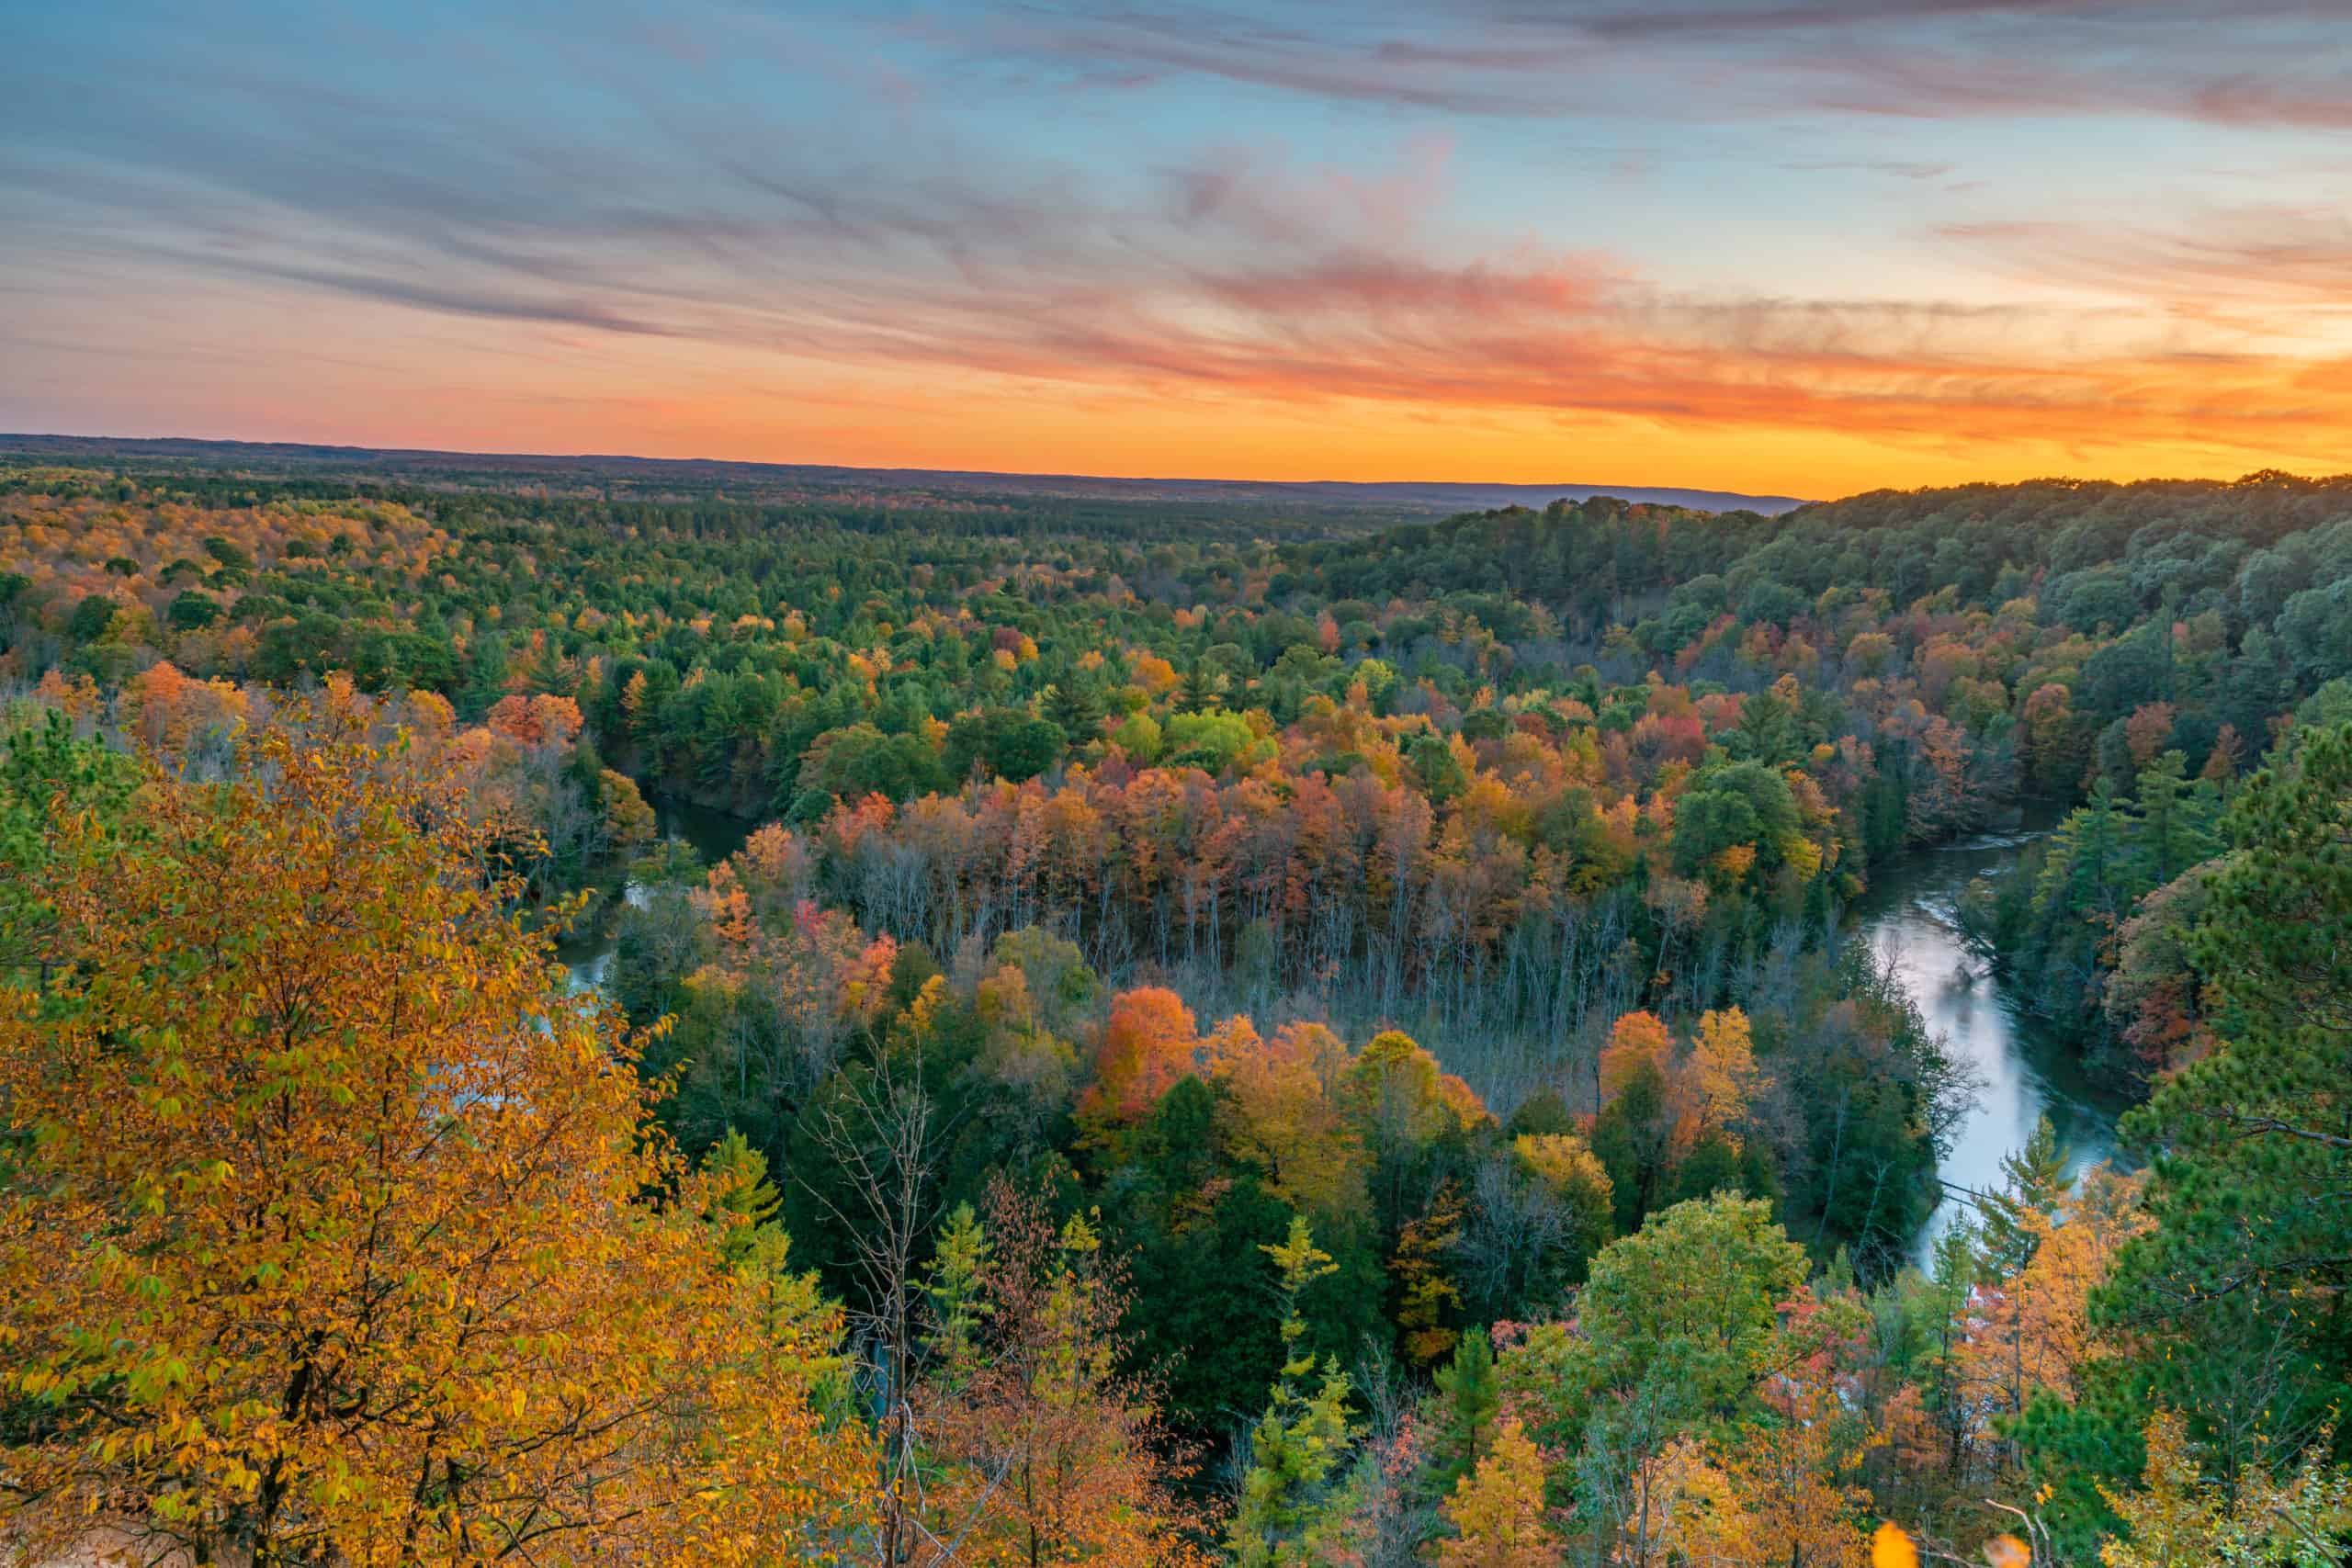 Scenic Michigan is Opening Applications to Join the Scenic Michigan Board of Directors